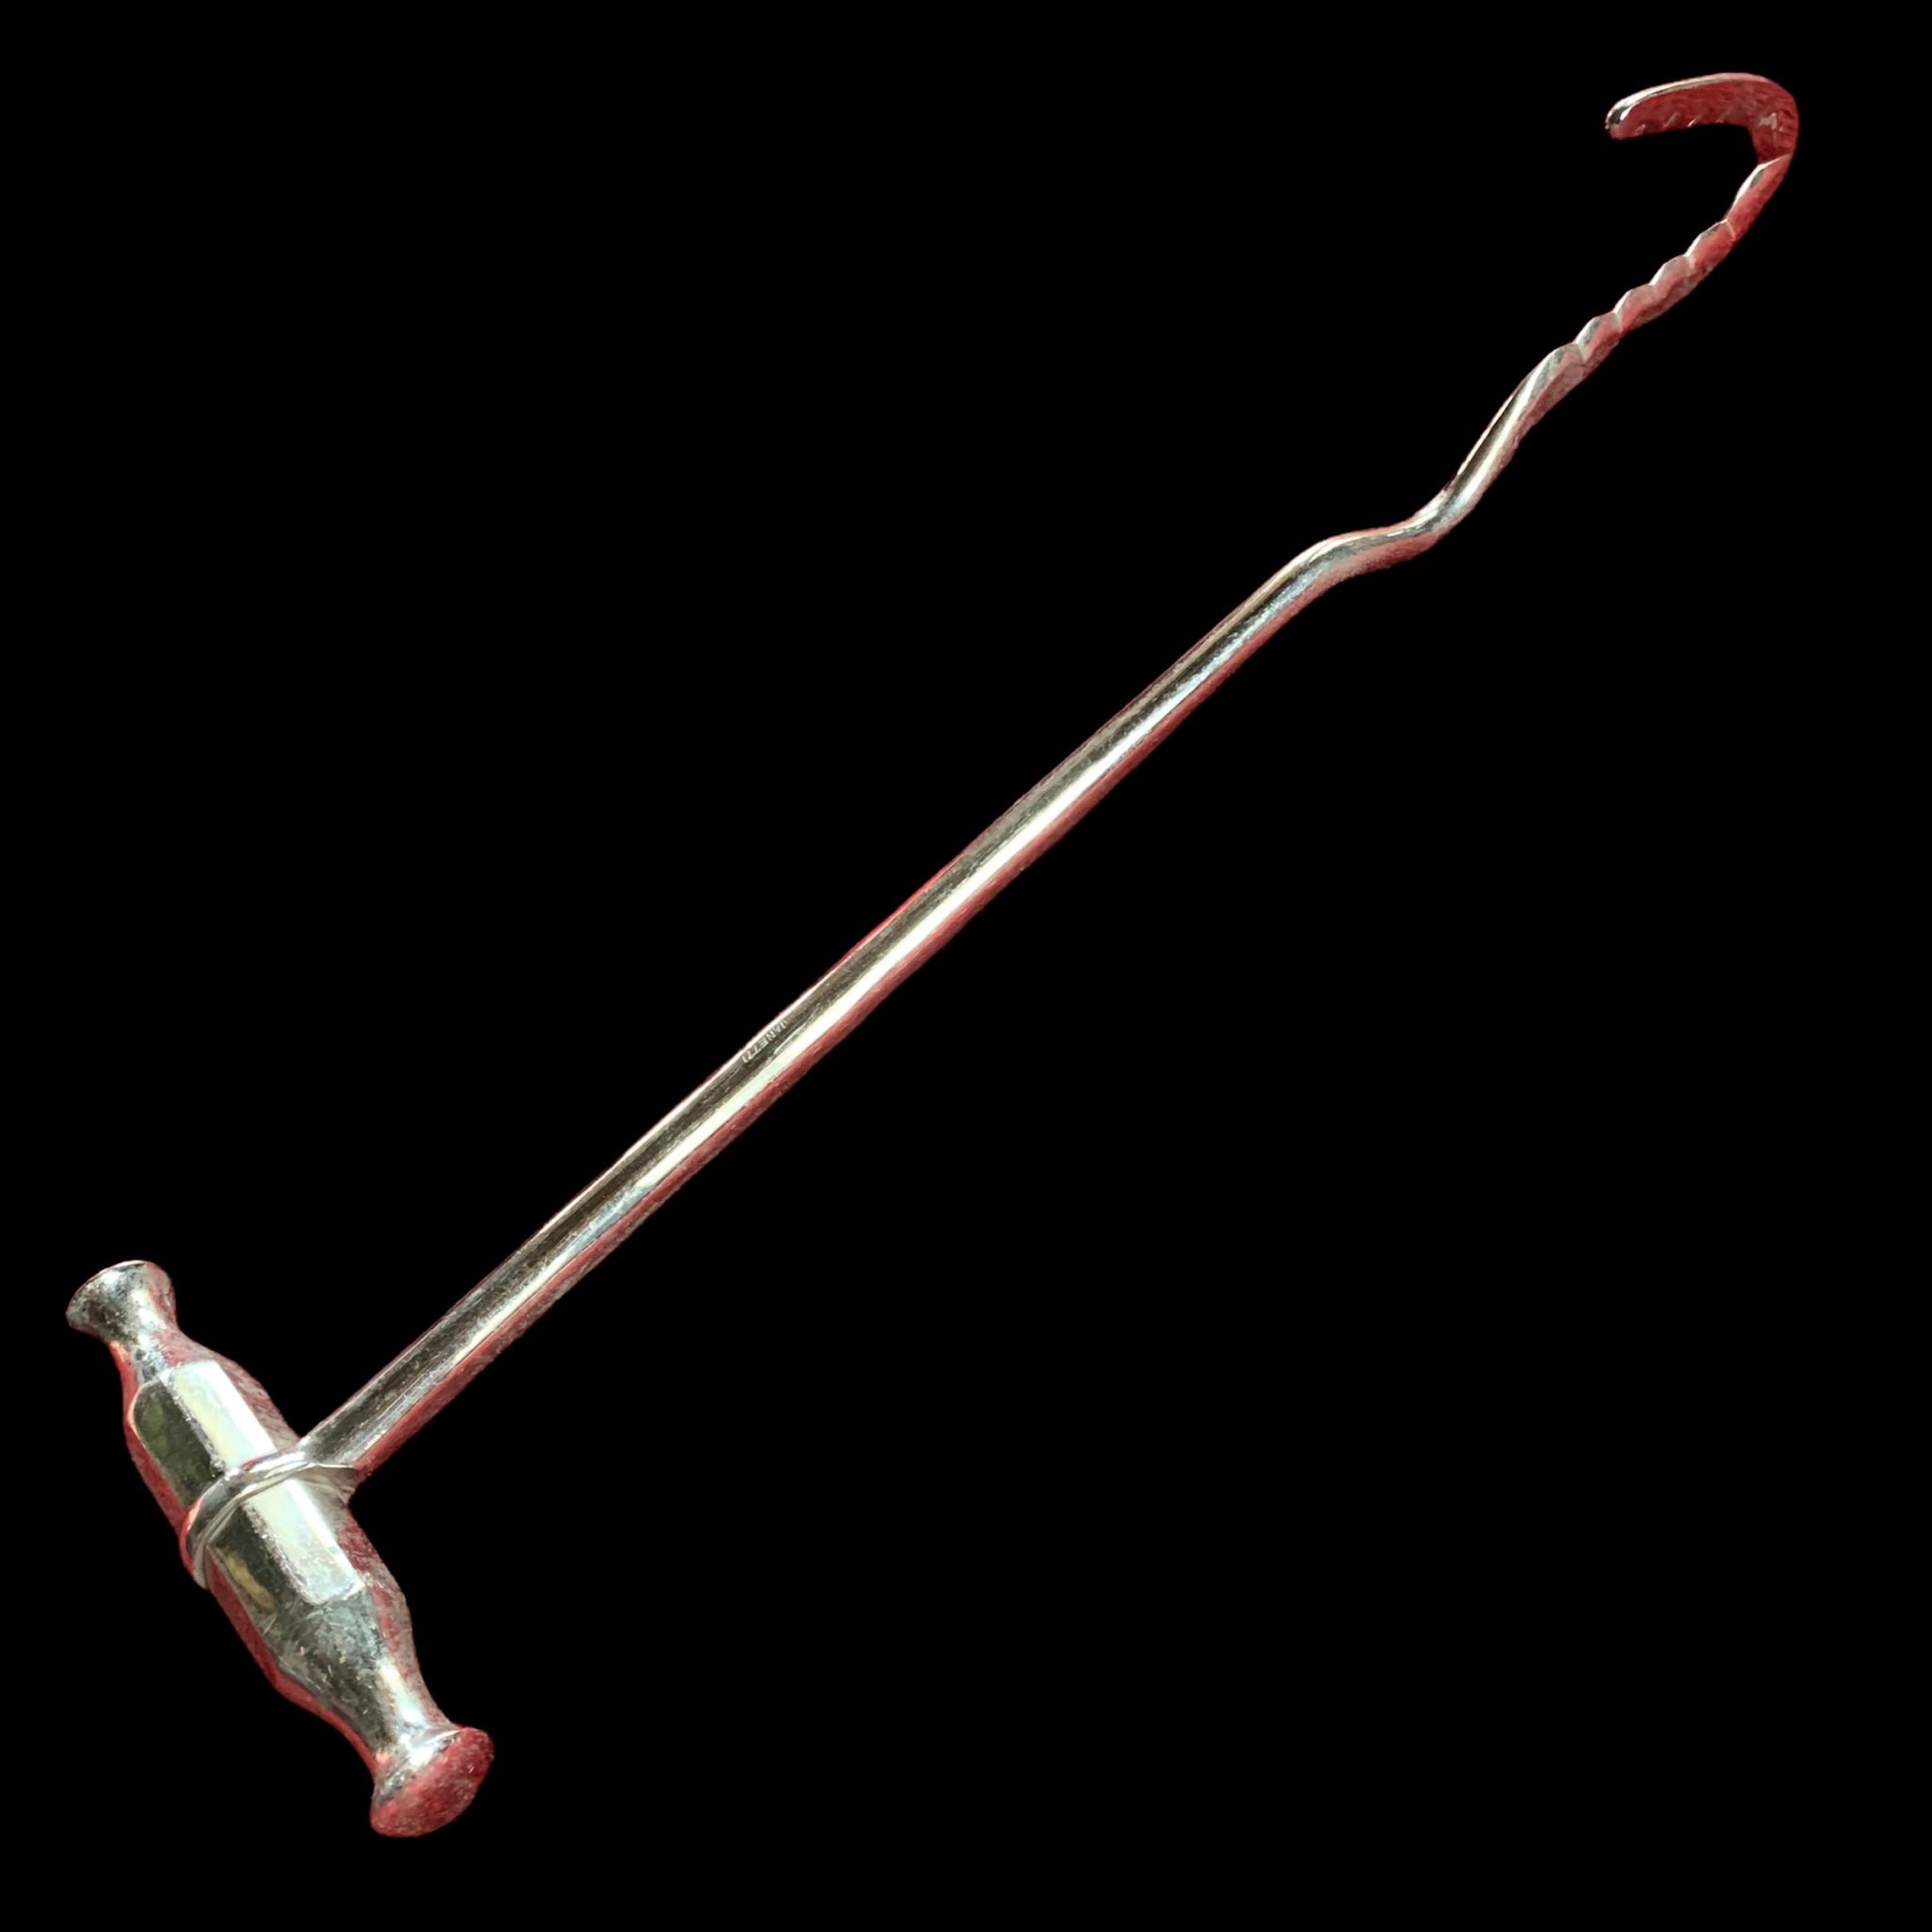 Italian obstetrical destructive decapitating hook, by